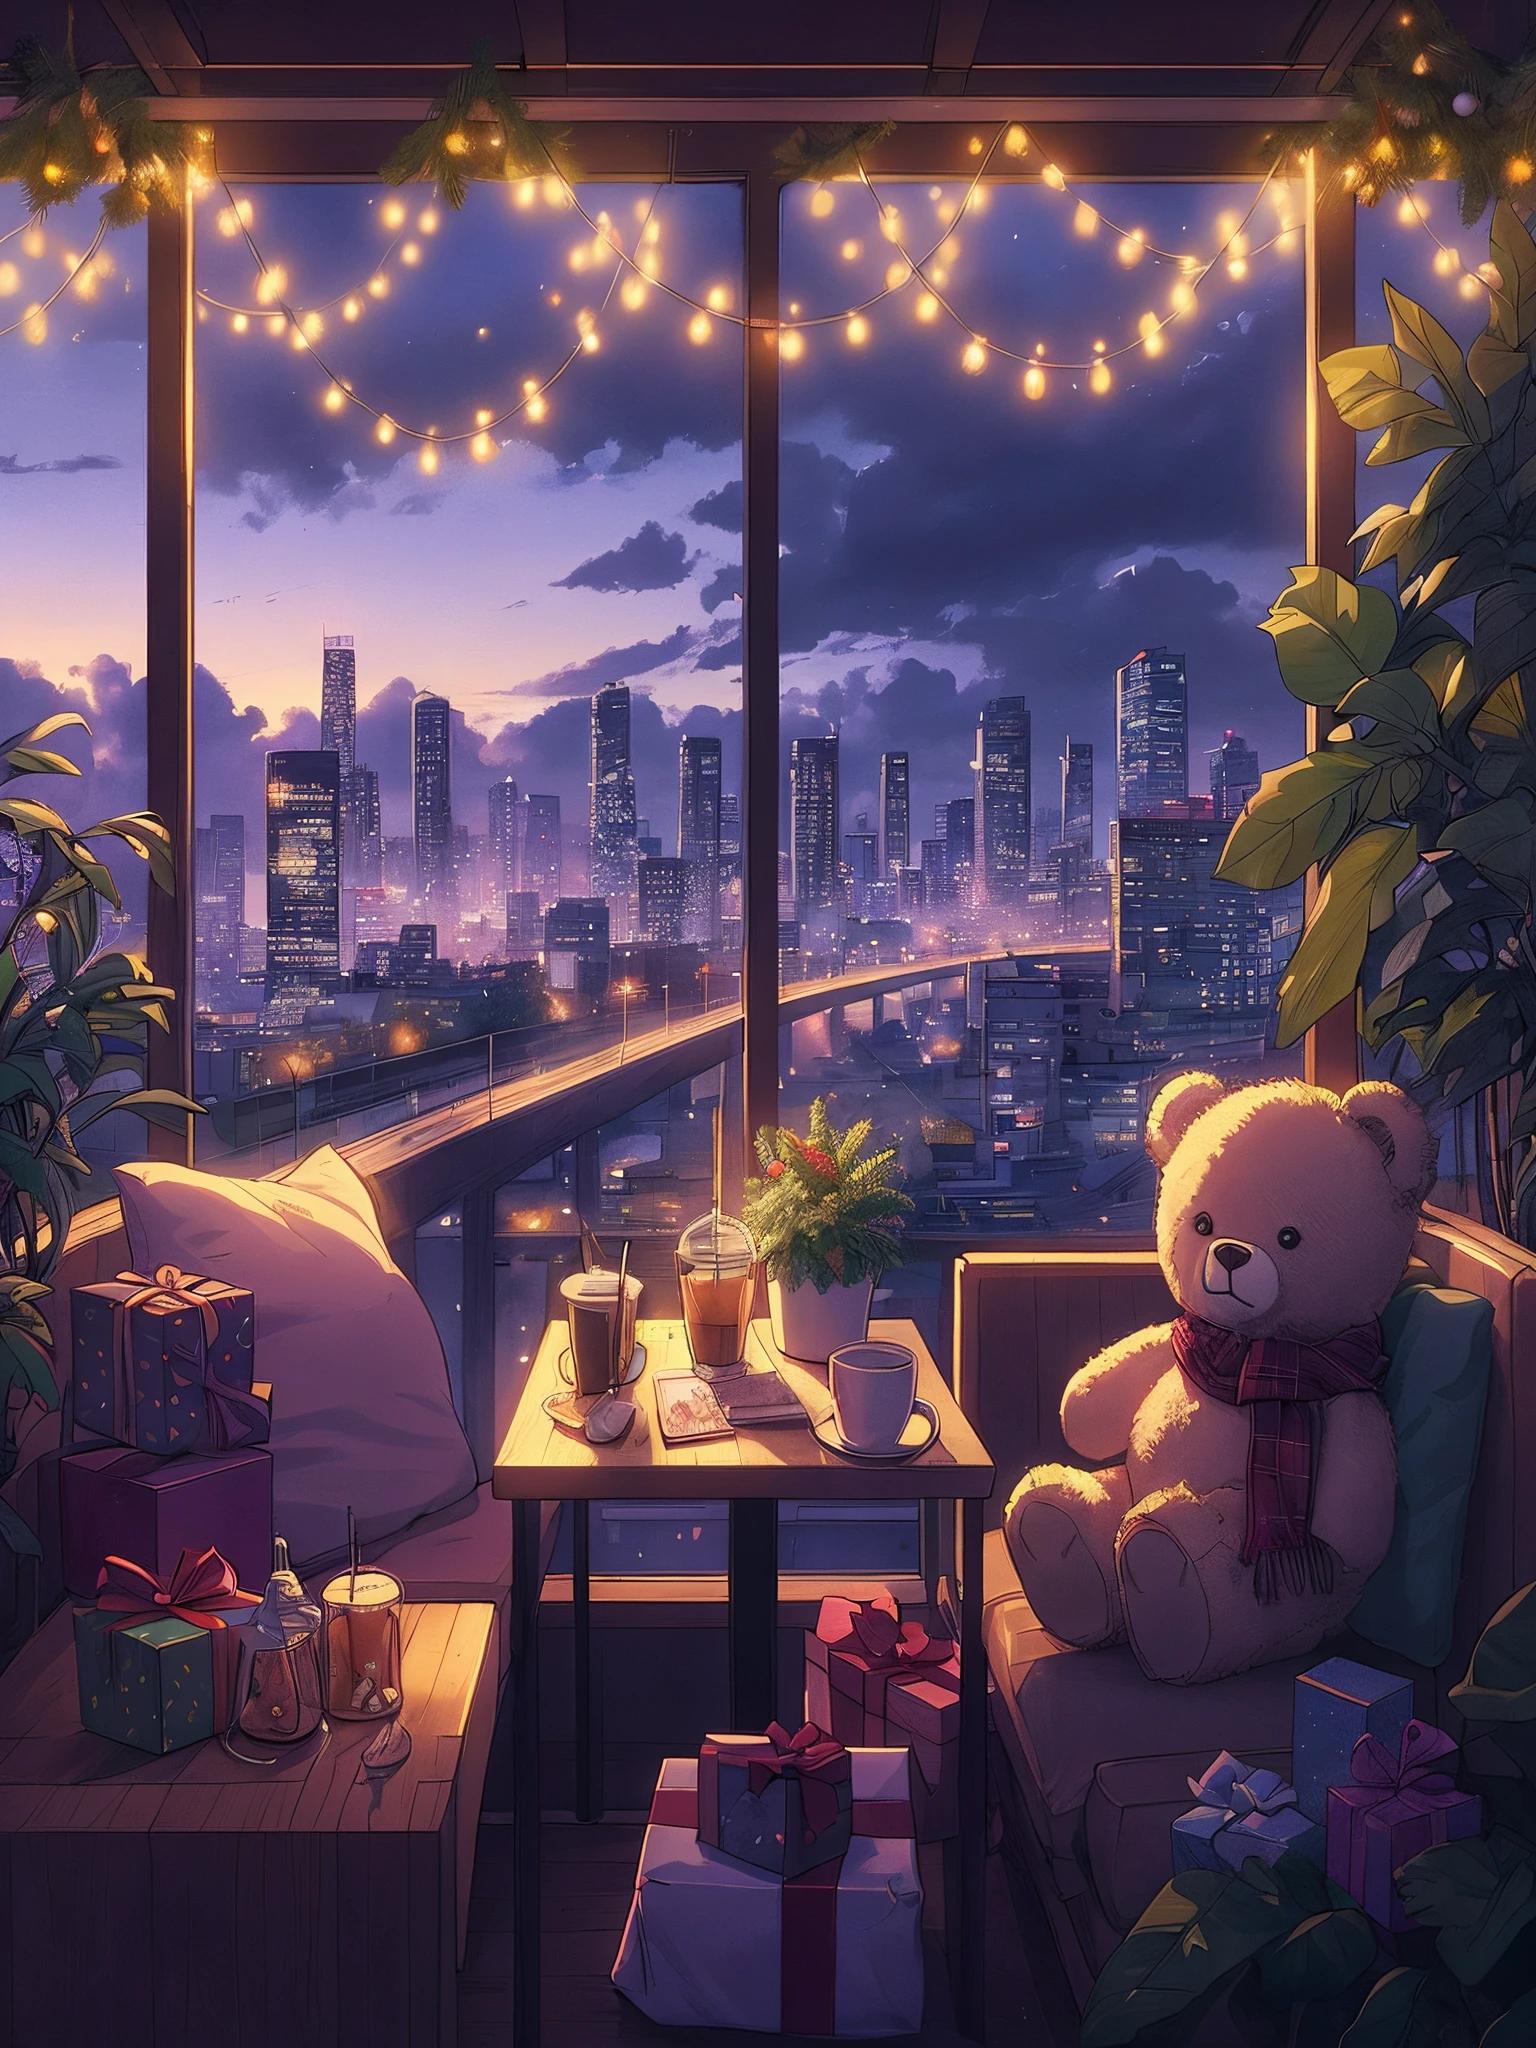 Draw an anime lofi scene of cafe with christmas decorations, teddy bear. plants, fairylights, giftpacks, city visible from window, ambient evening light, no human, cloudy sky, beautiful color palette